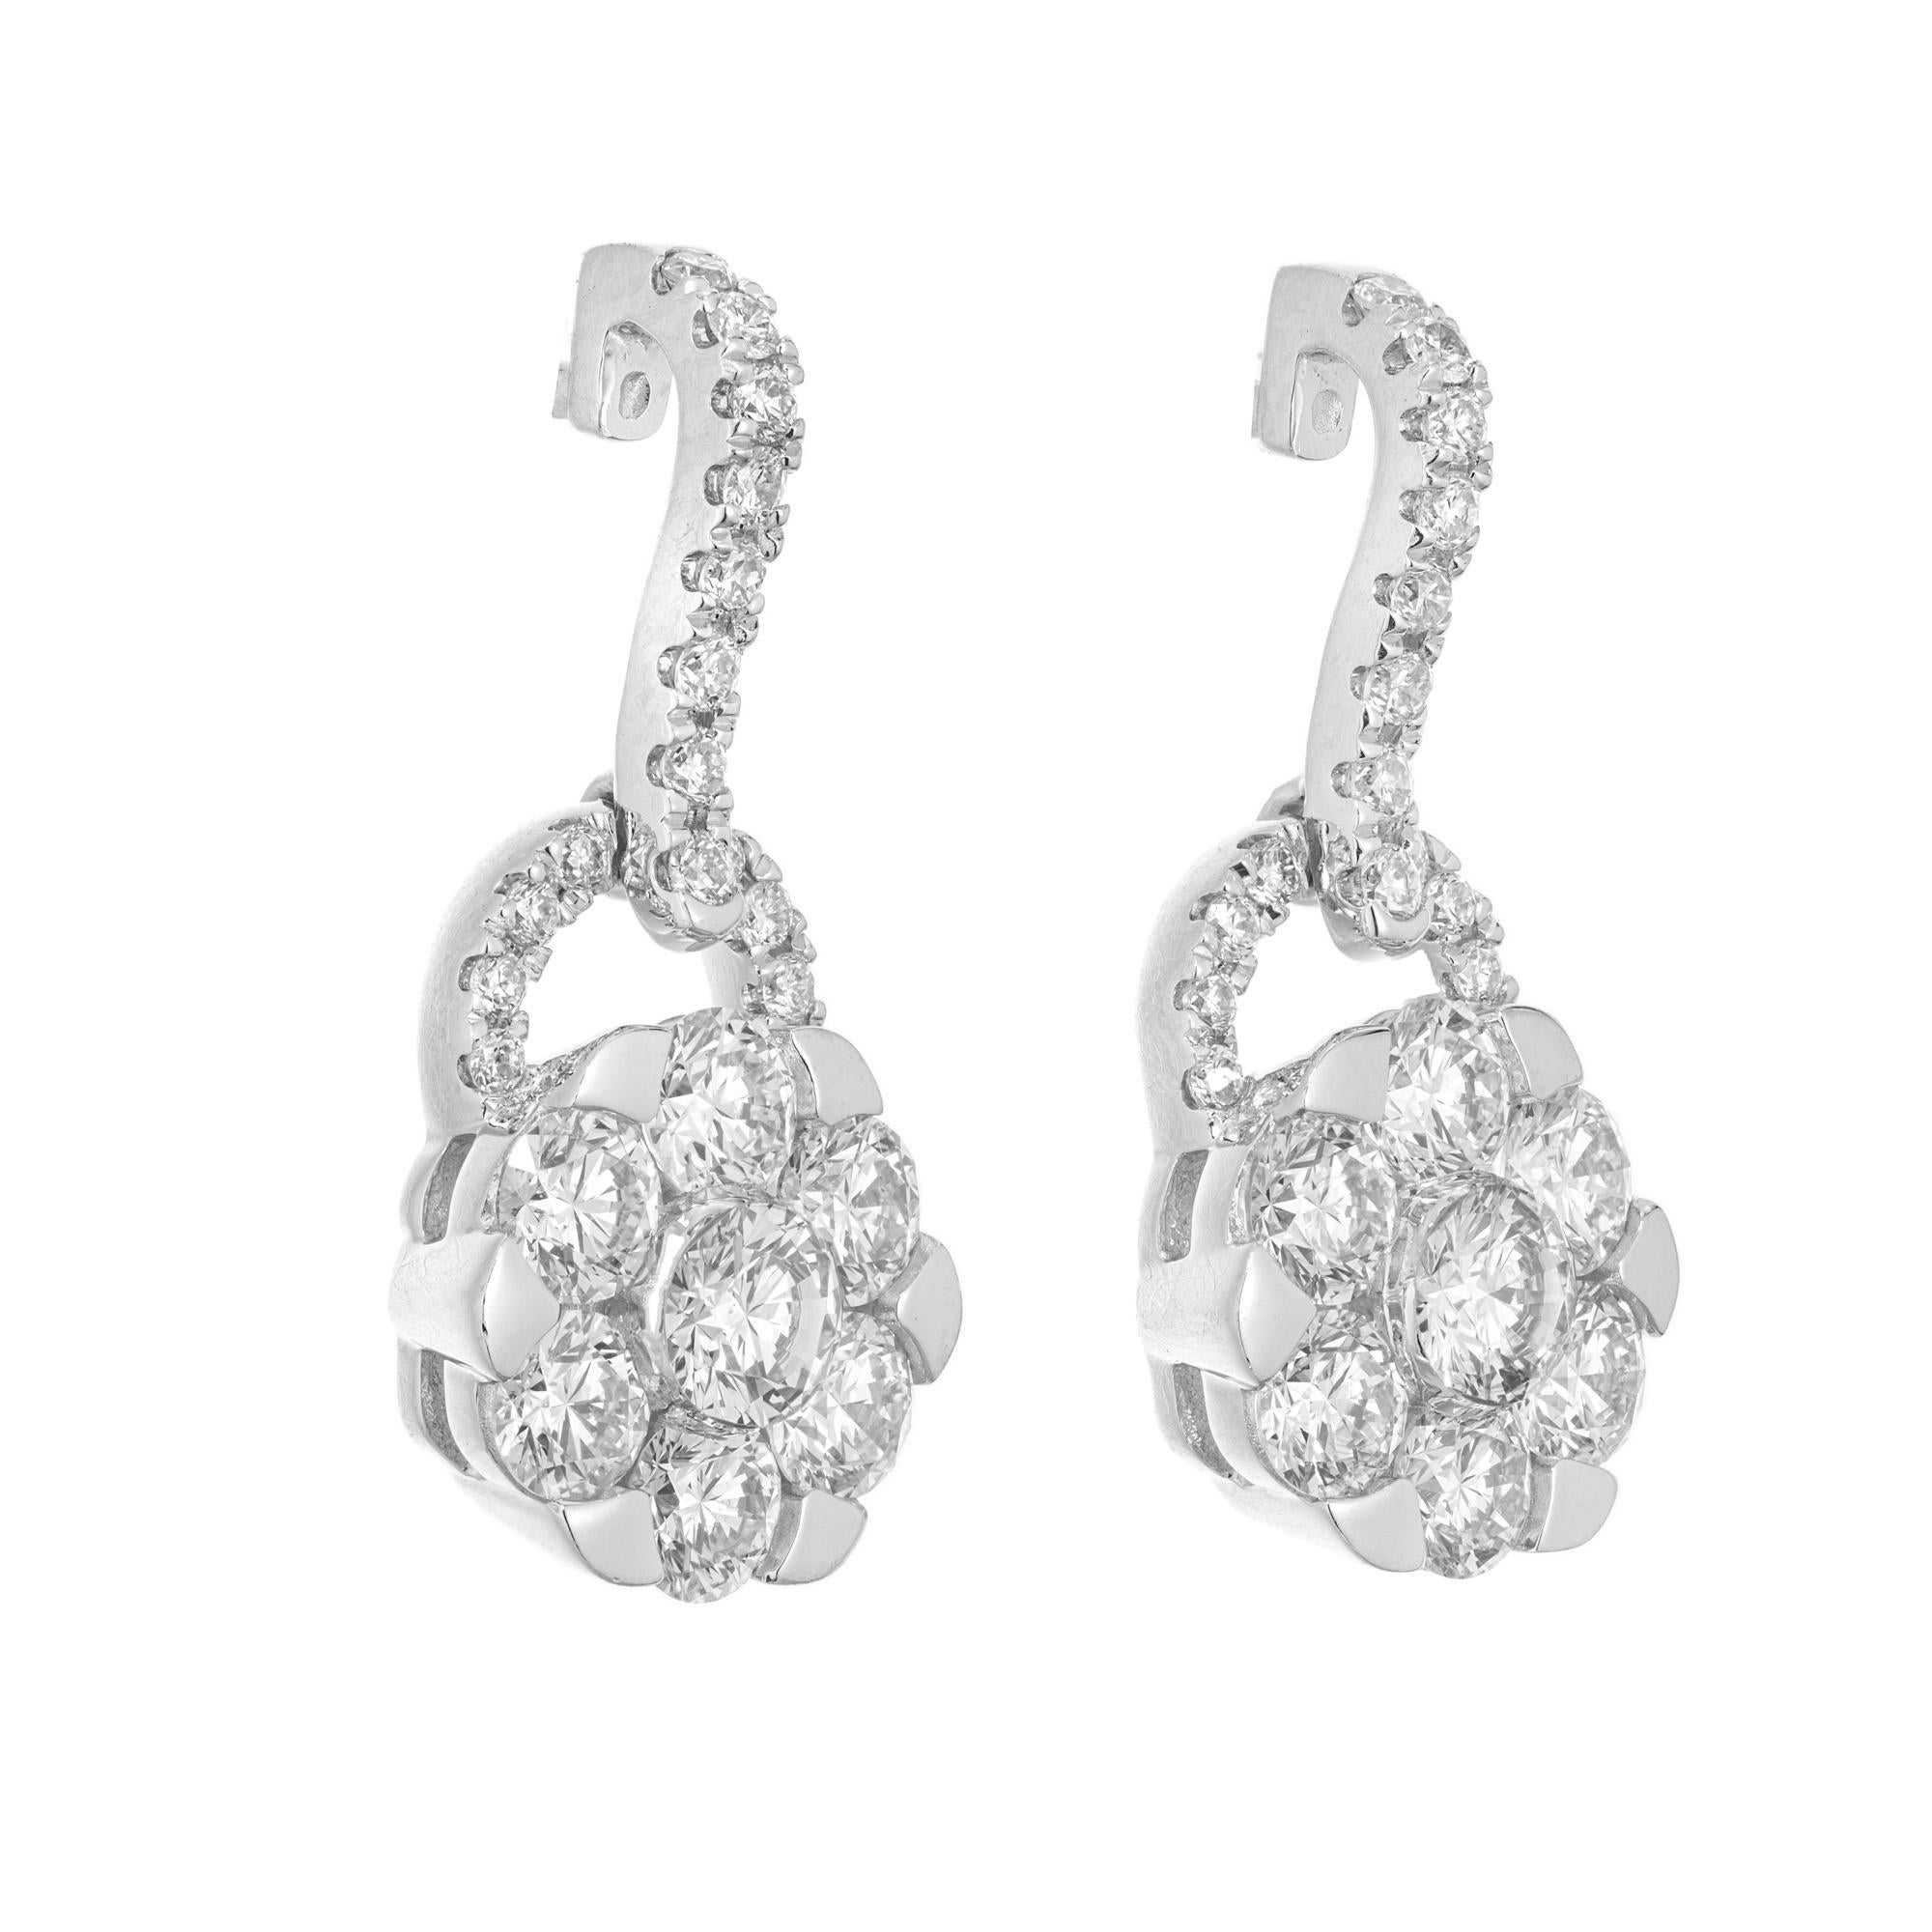 Diamond dangle earrings. 46 round brilliant cut diamonds totaling 1.00cts, set in 14k white gold settings. Two flower designed dangles each with seven round cut diamonds with a half diamond hoop that is connected to a diamond hinge. Designed and